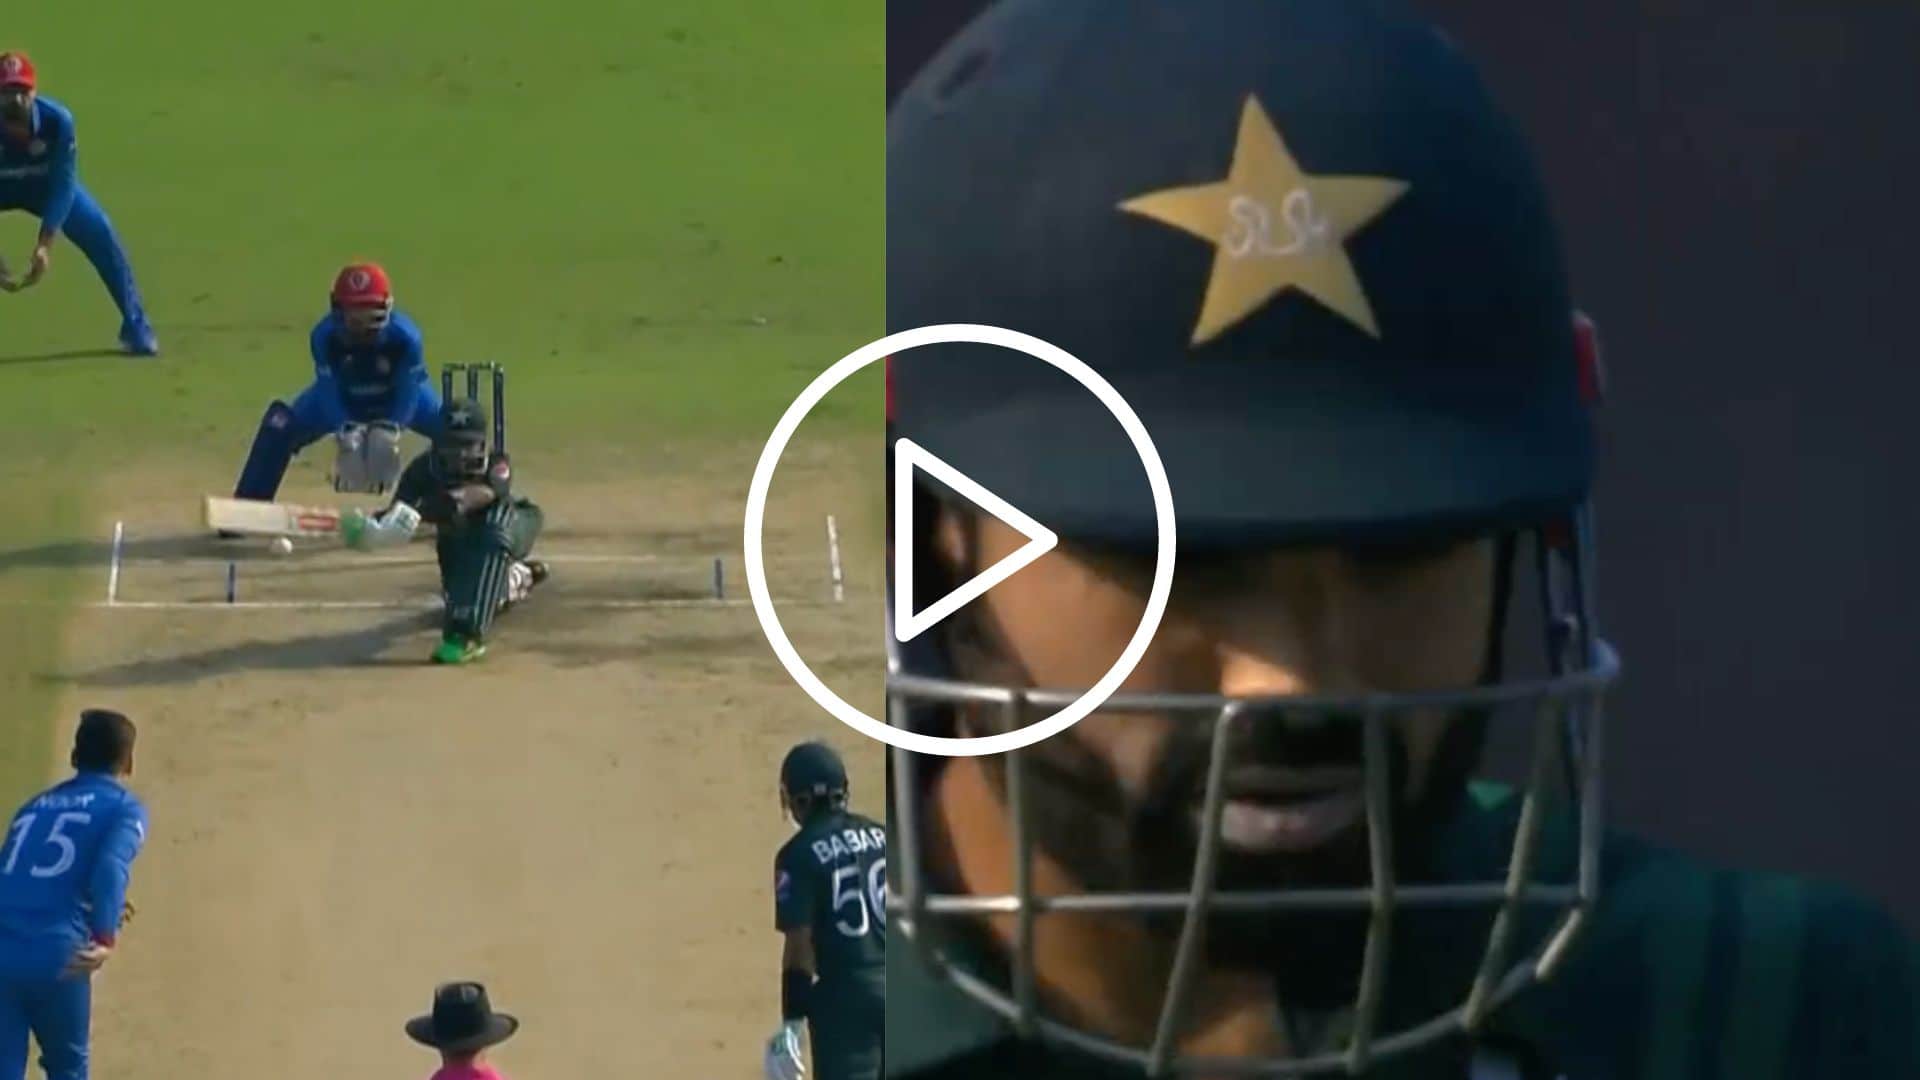 [Watch] Mohammad Rizwan 'Disgusted' After Throwing His Wicket Vs Afghanistan